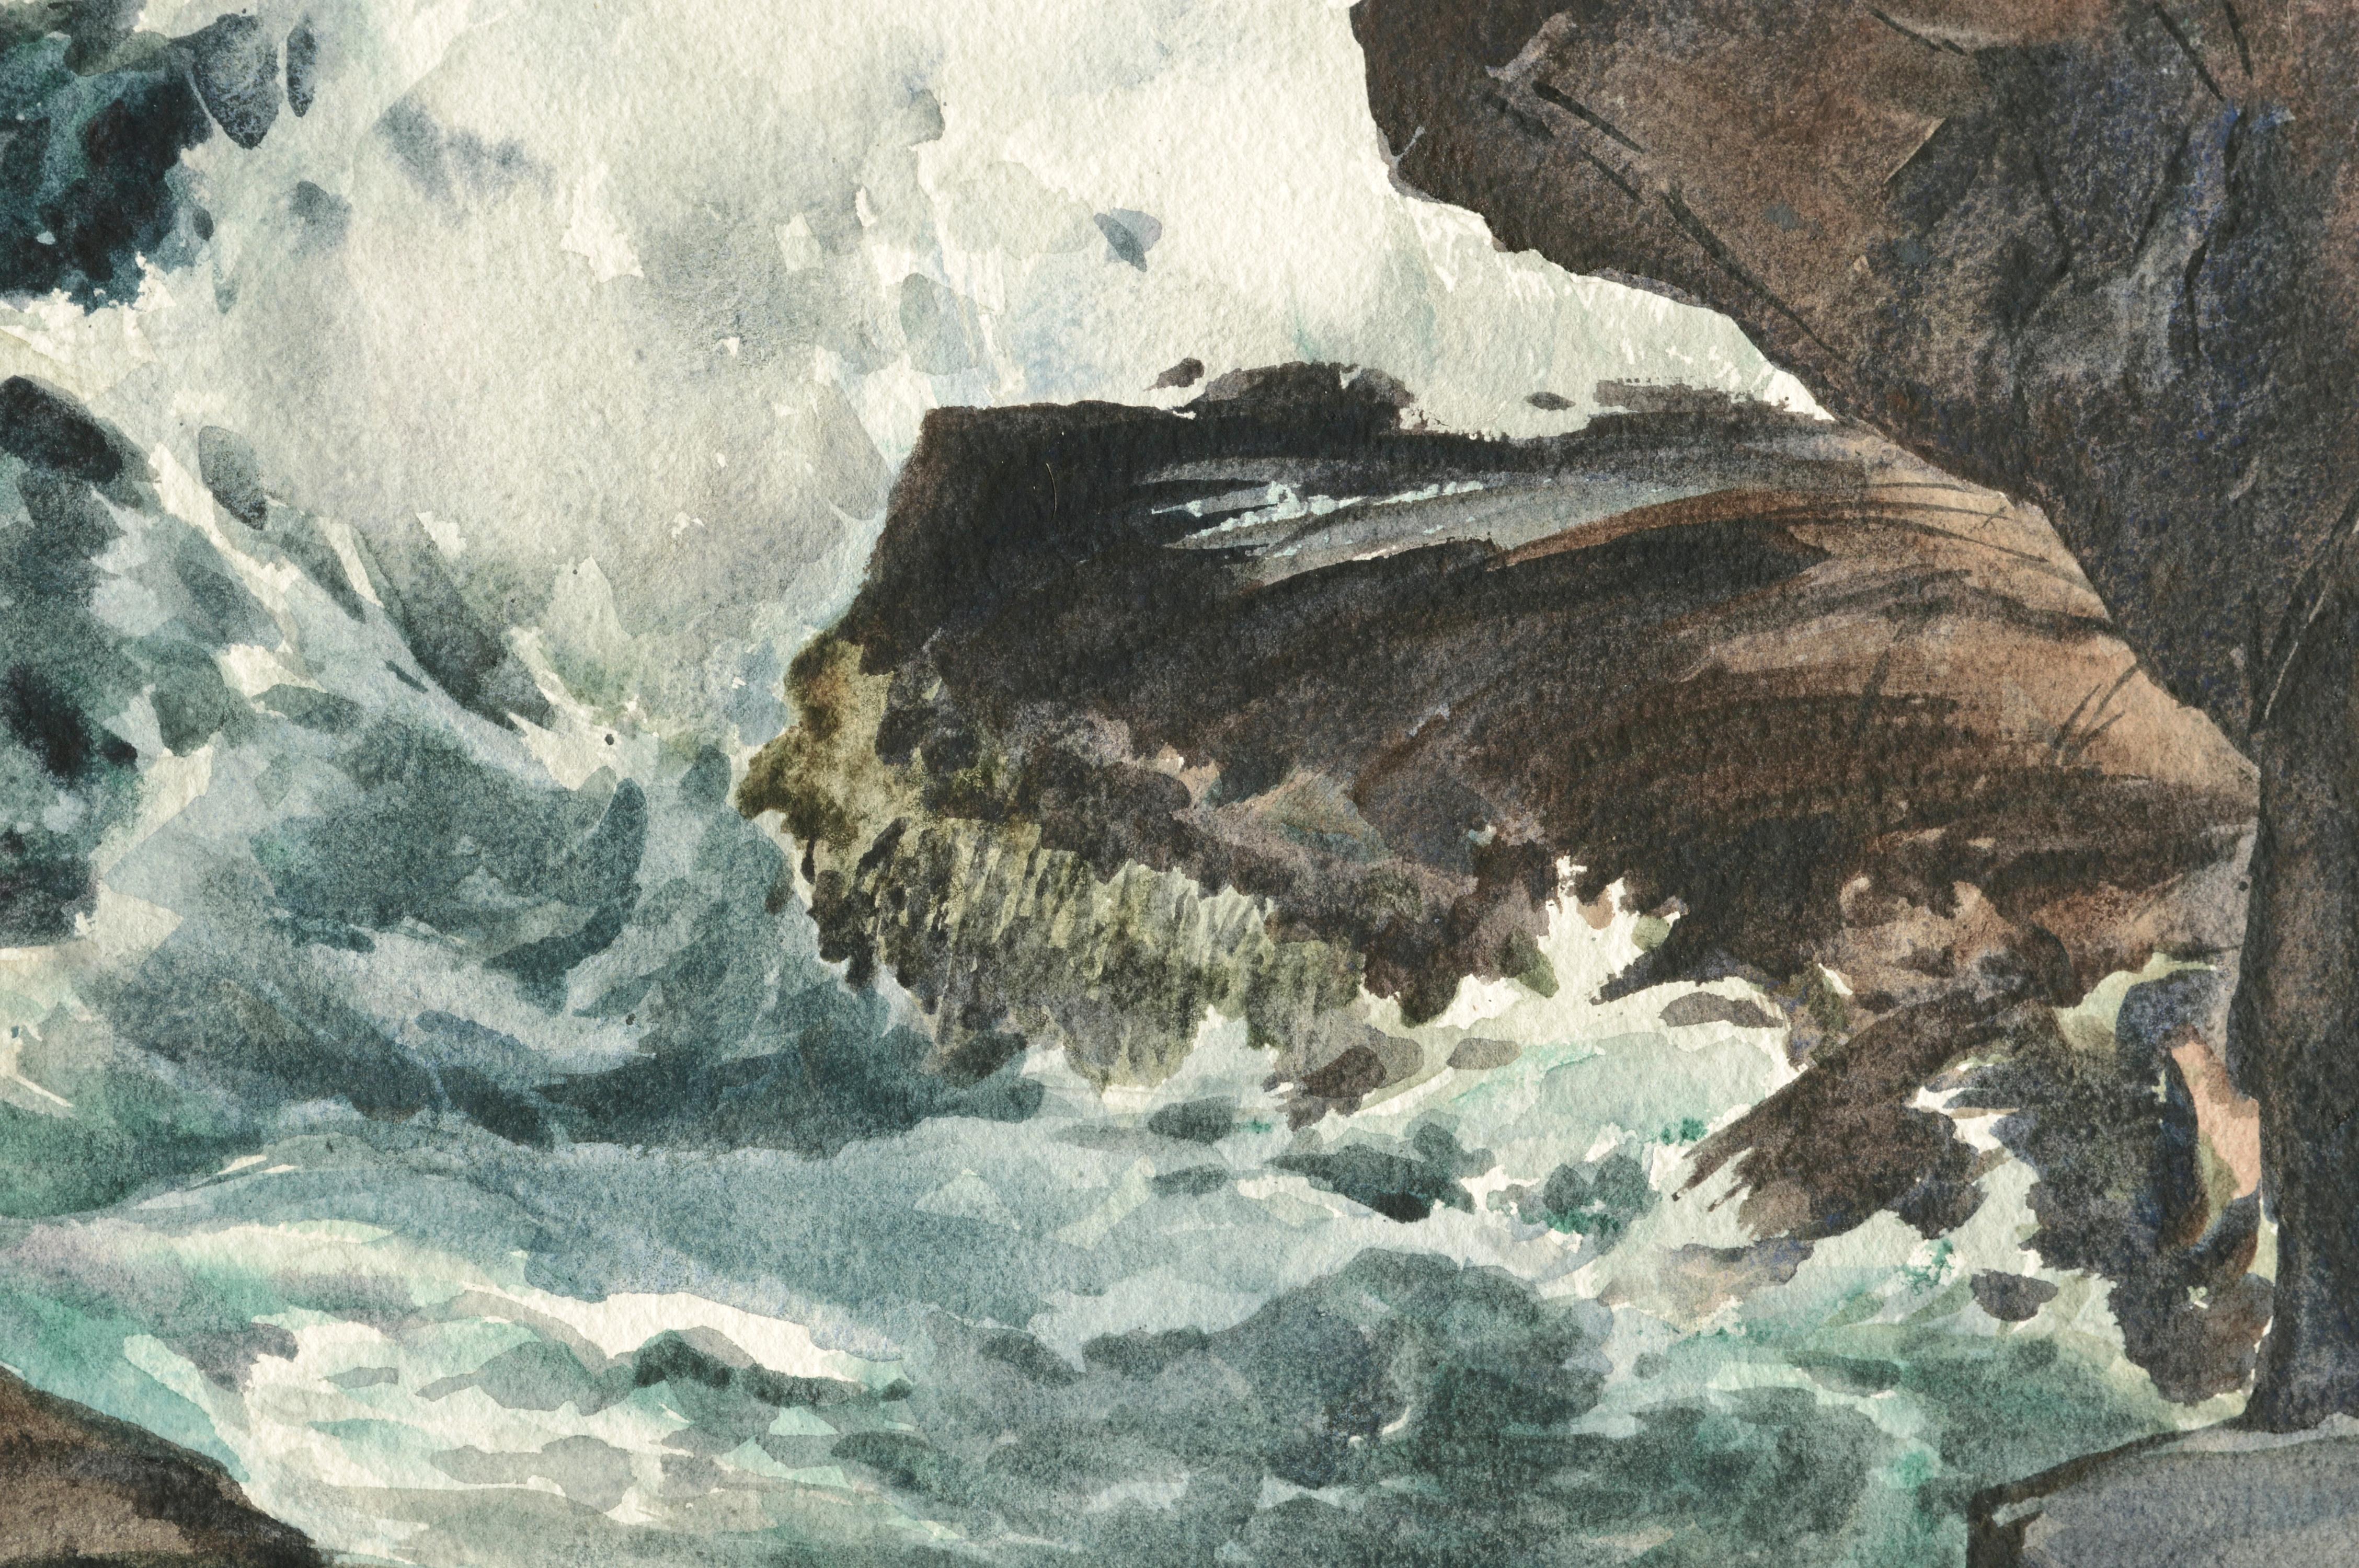 Seascape of tide pools and crashing waves by Joseph Yeager (early-mid 20th Century) on heavy bond watercolor paper with ragged edges. Signed 